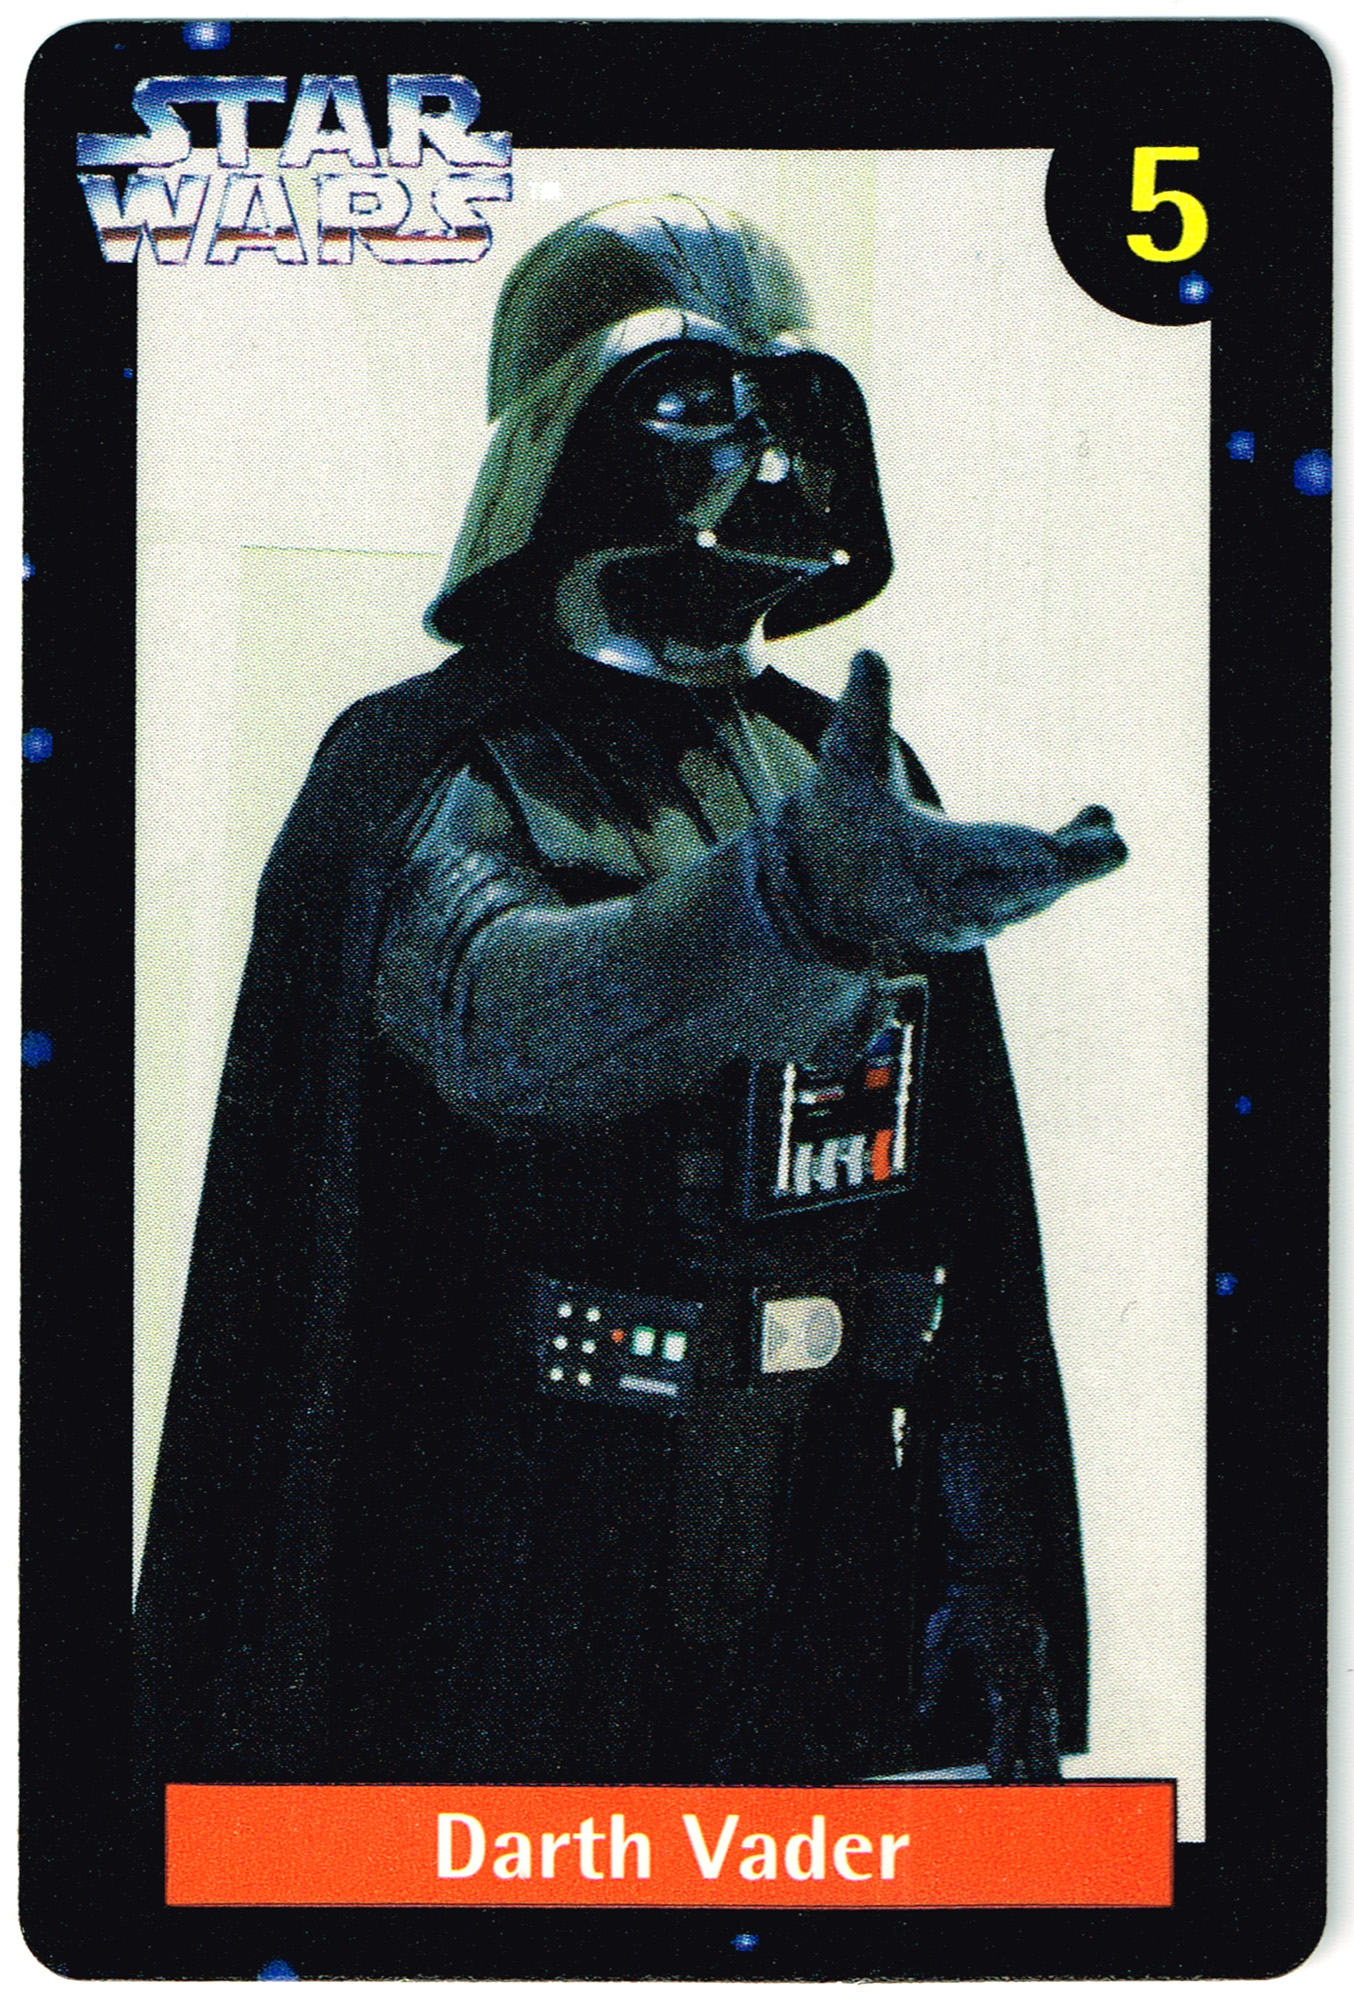 Quality Bakers Card 5 - Darth Vader